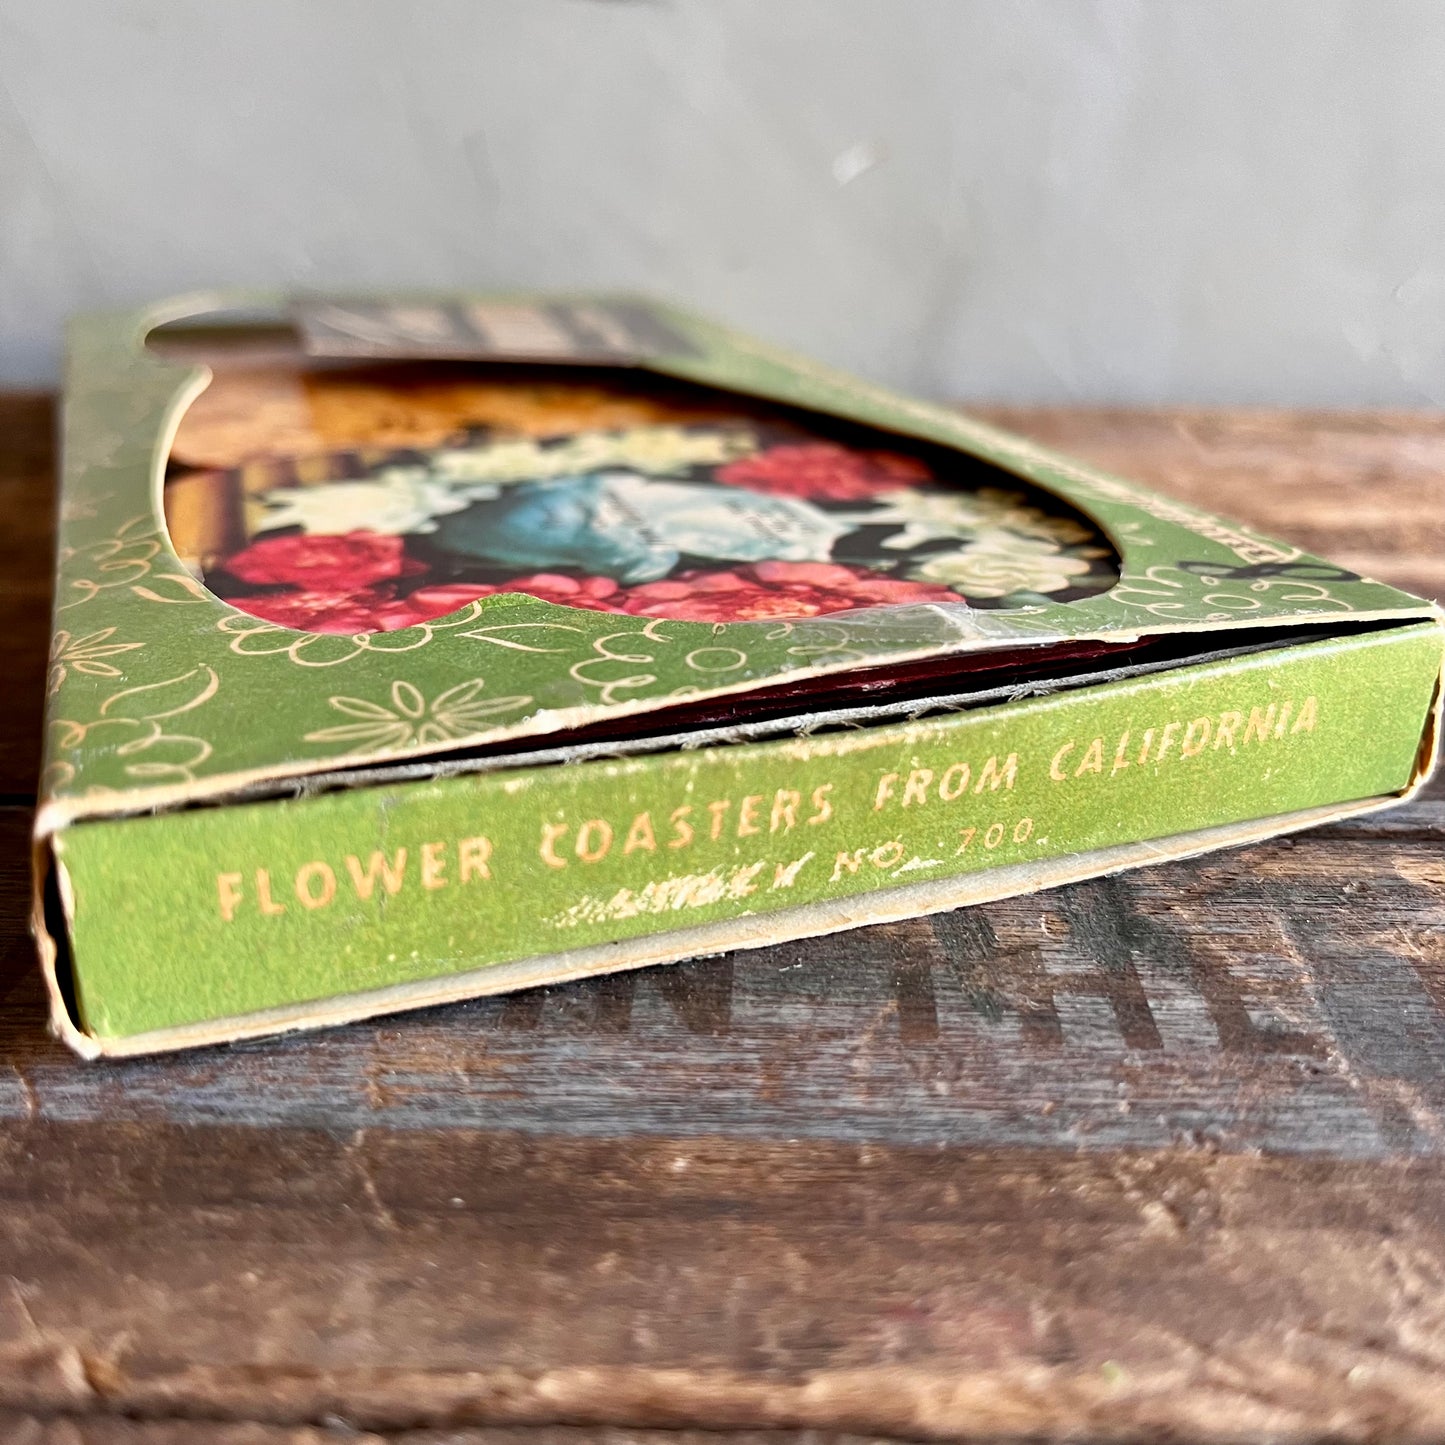 【USA vintage】コースター　Flower Coasters from California